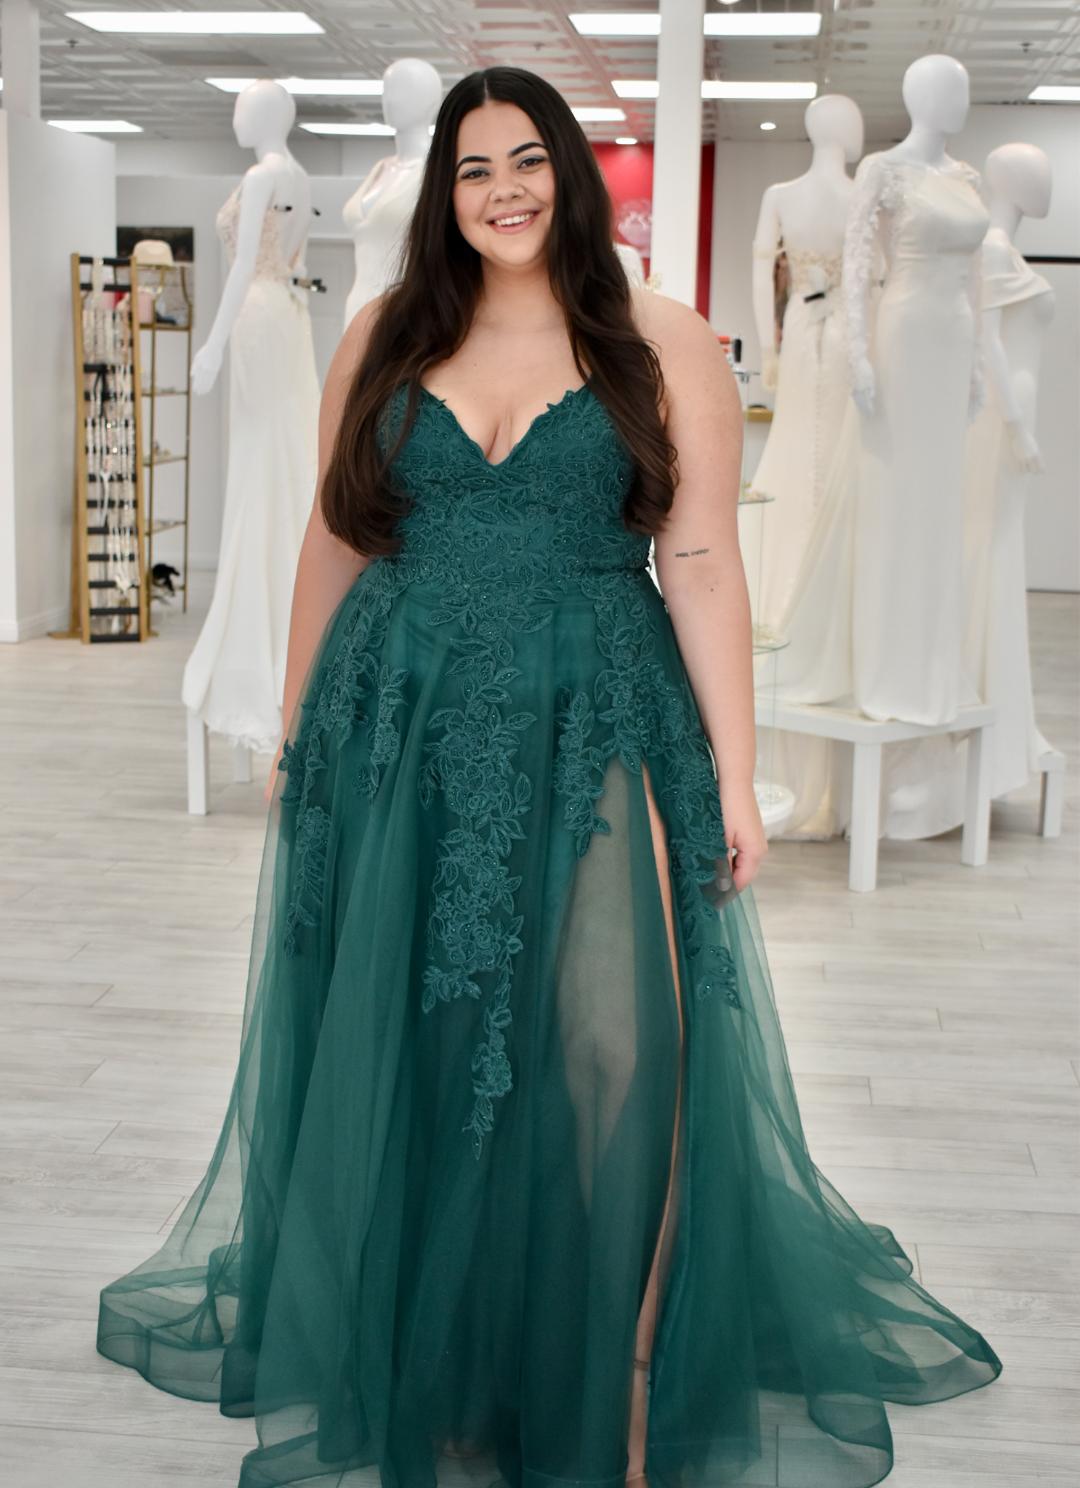 Plus Size Prom Dresses | Ball, Formal & Evening Gowns | ASOS